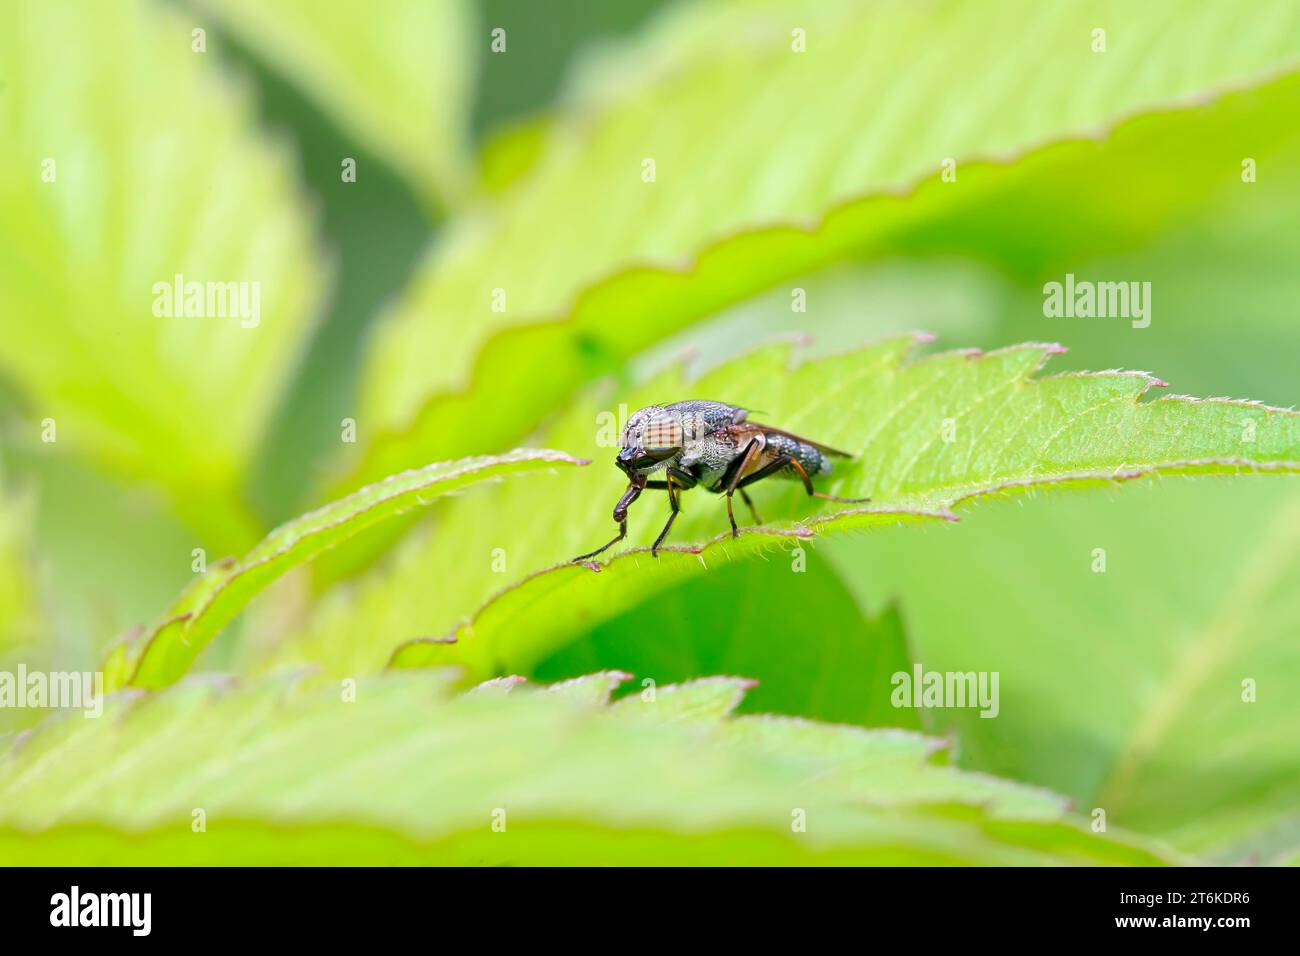 closeup of Stomorhina insects on green leaf Stock Photo